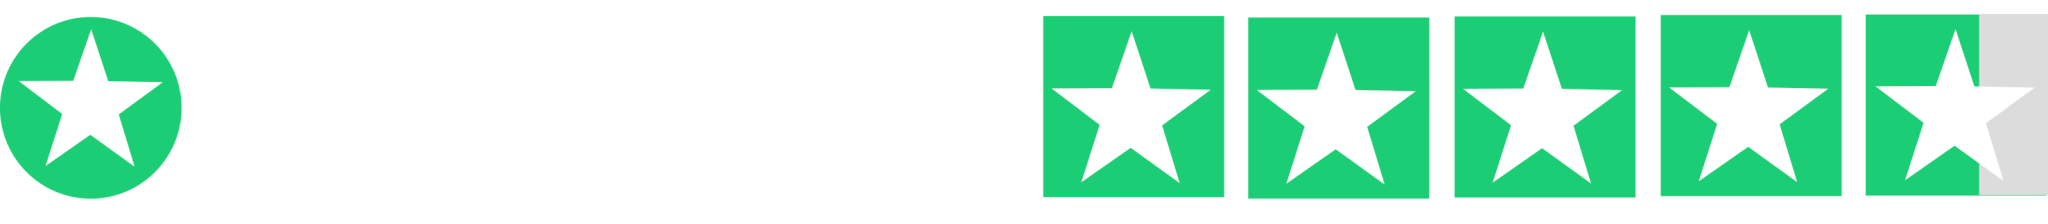 review-stars2.png